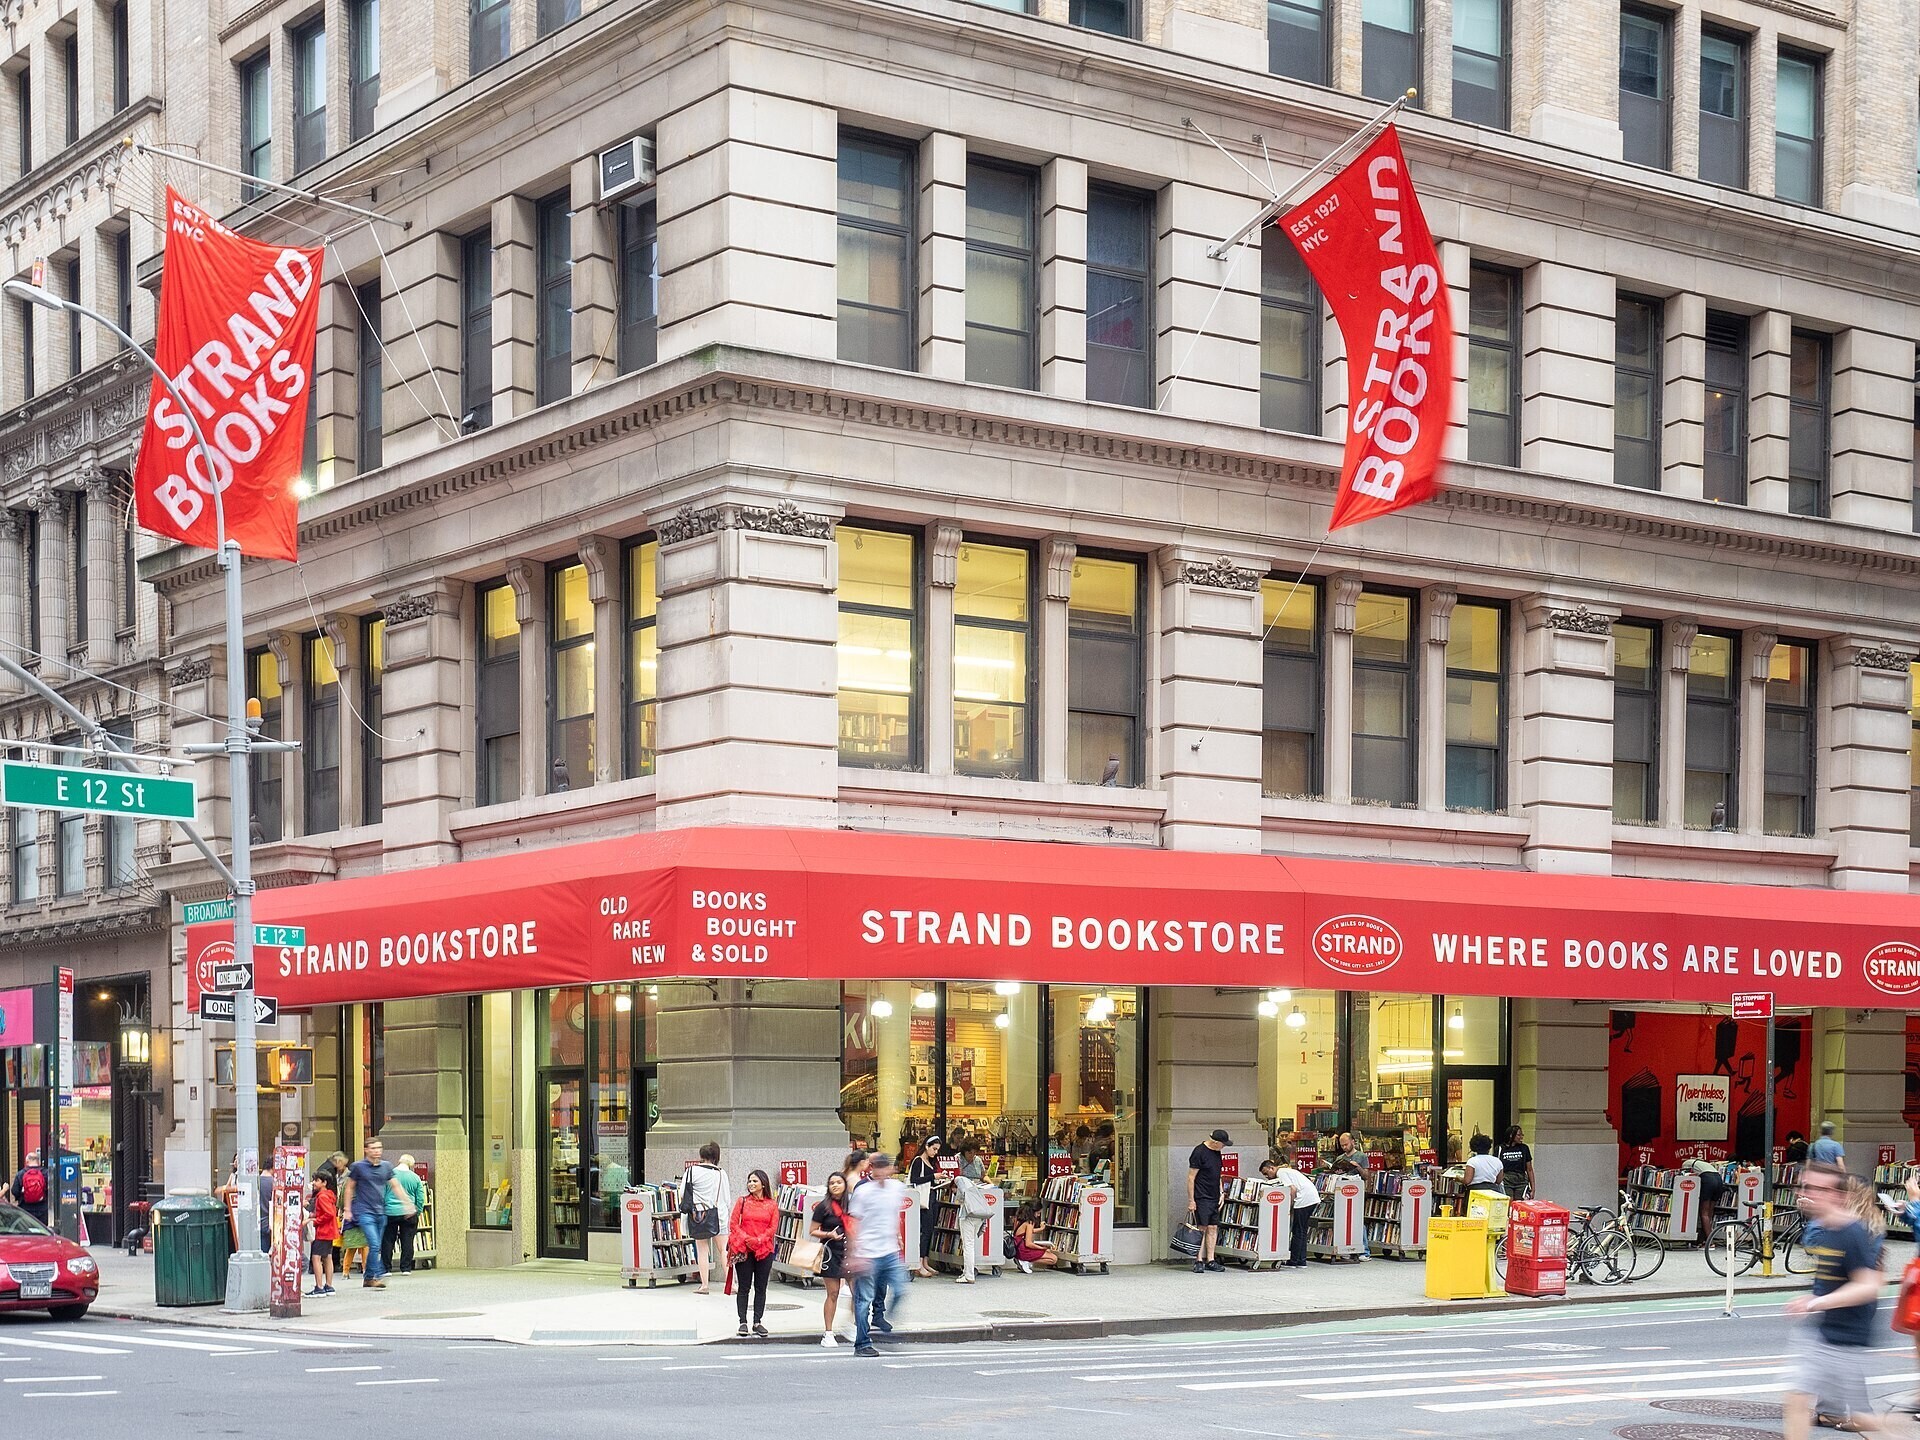 Exterior of Strand Bookstore with red awnings and people browsing outdoor bookshelves